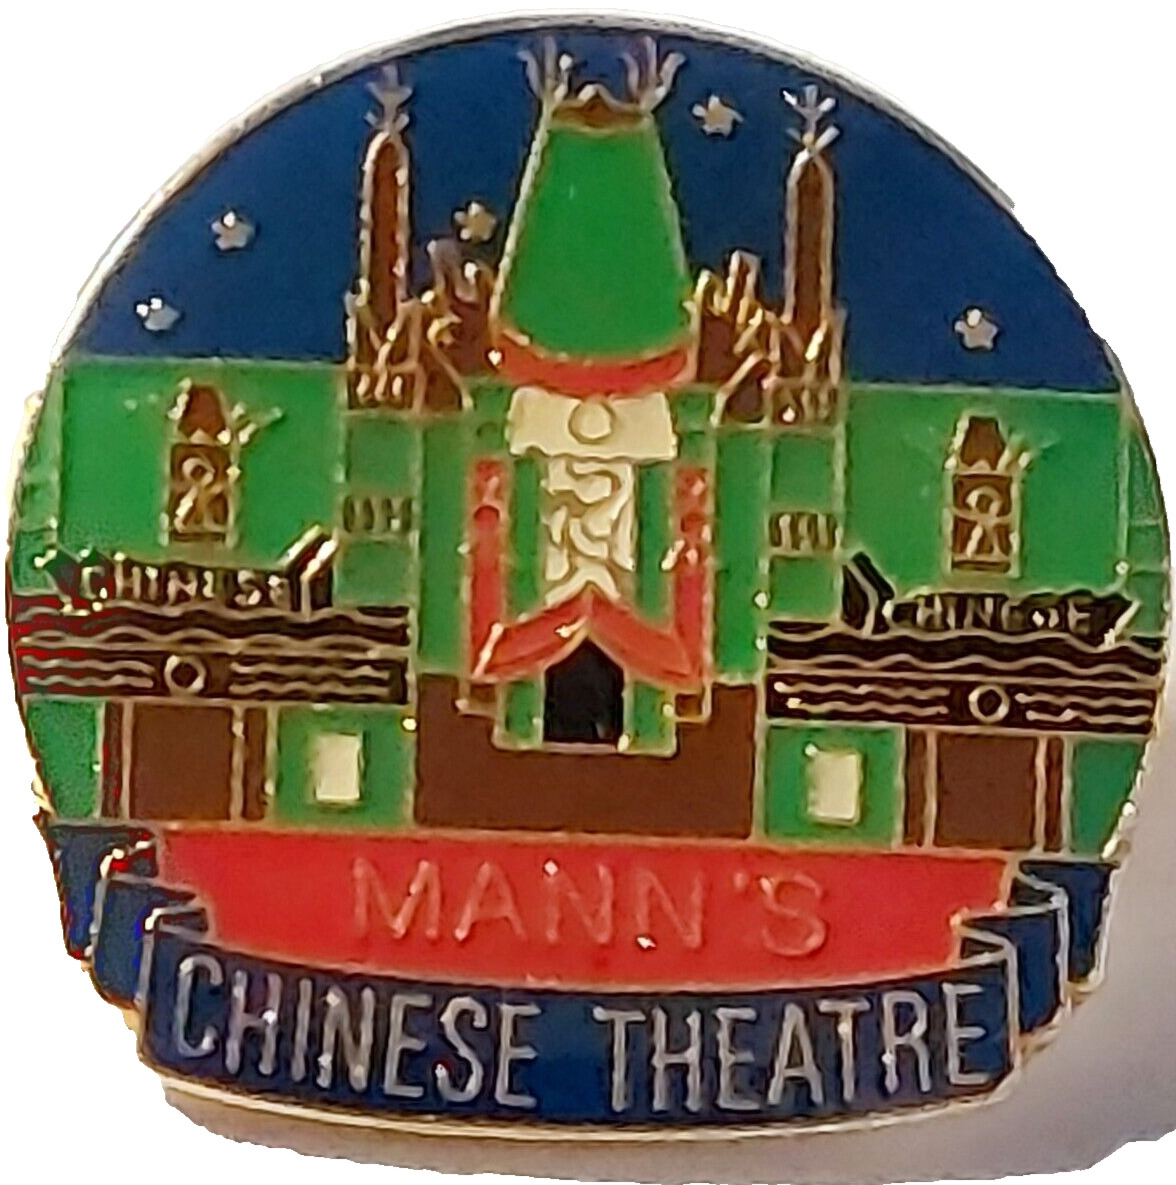 Mann\'s Chinese Theatre Hollywood California Lapel Pin